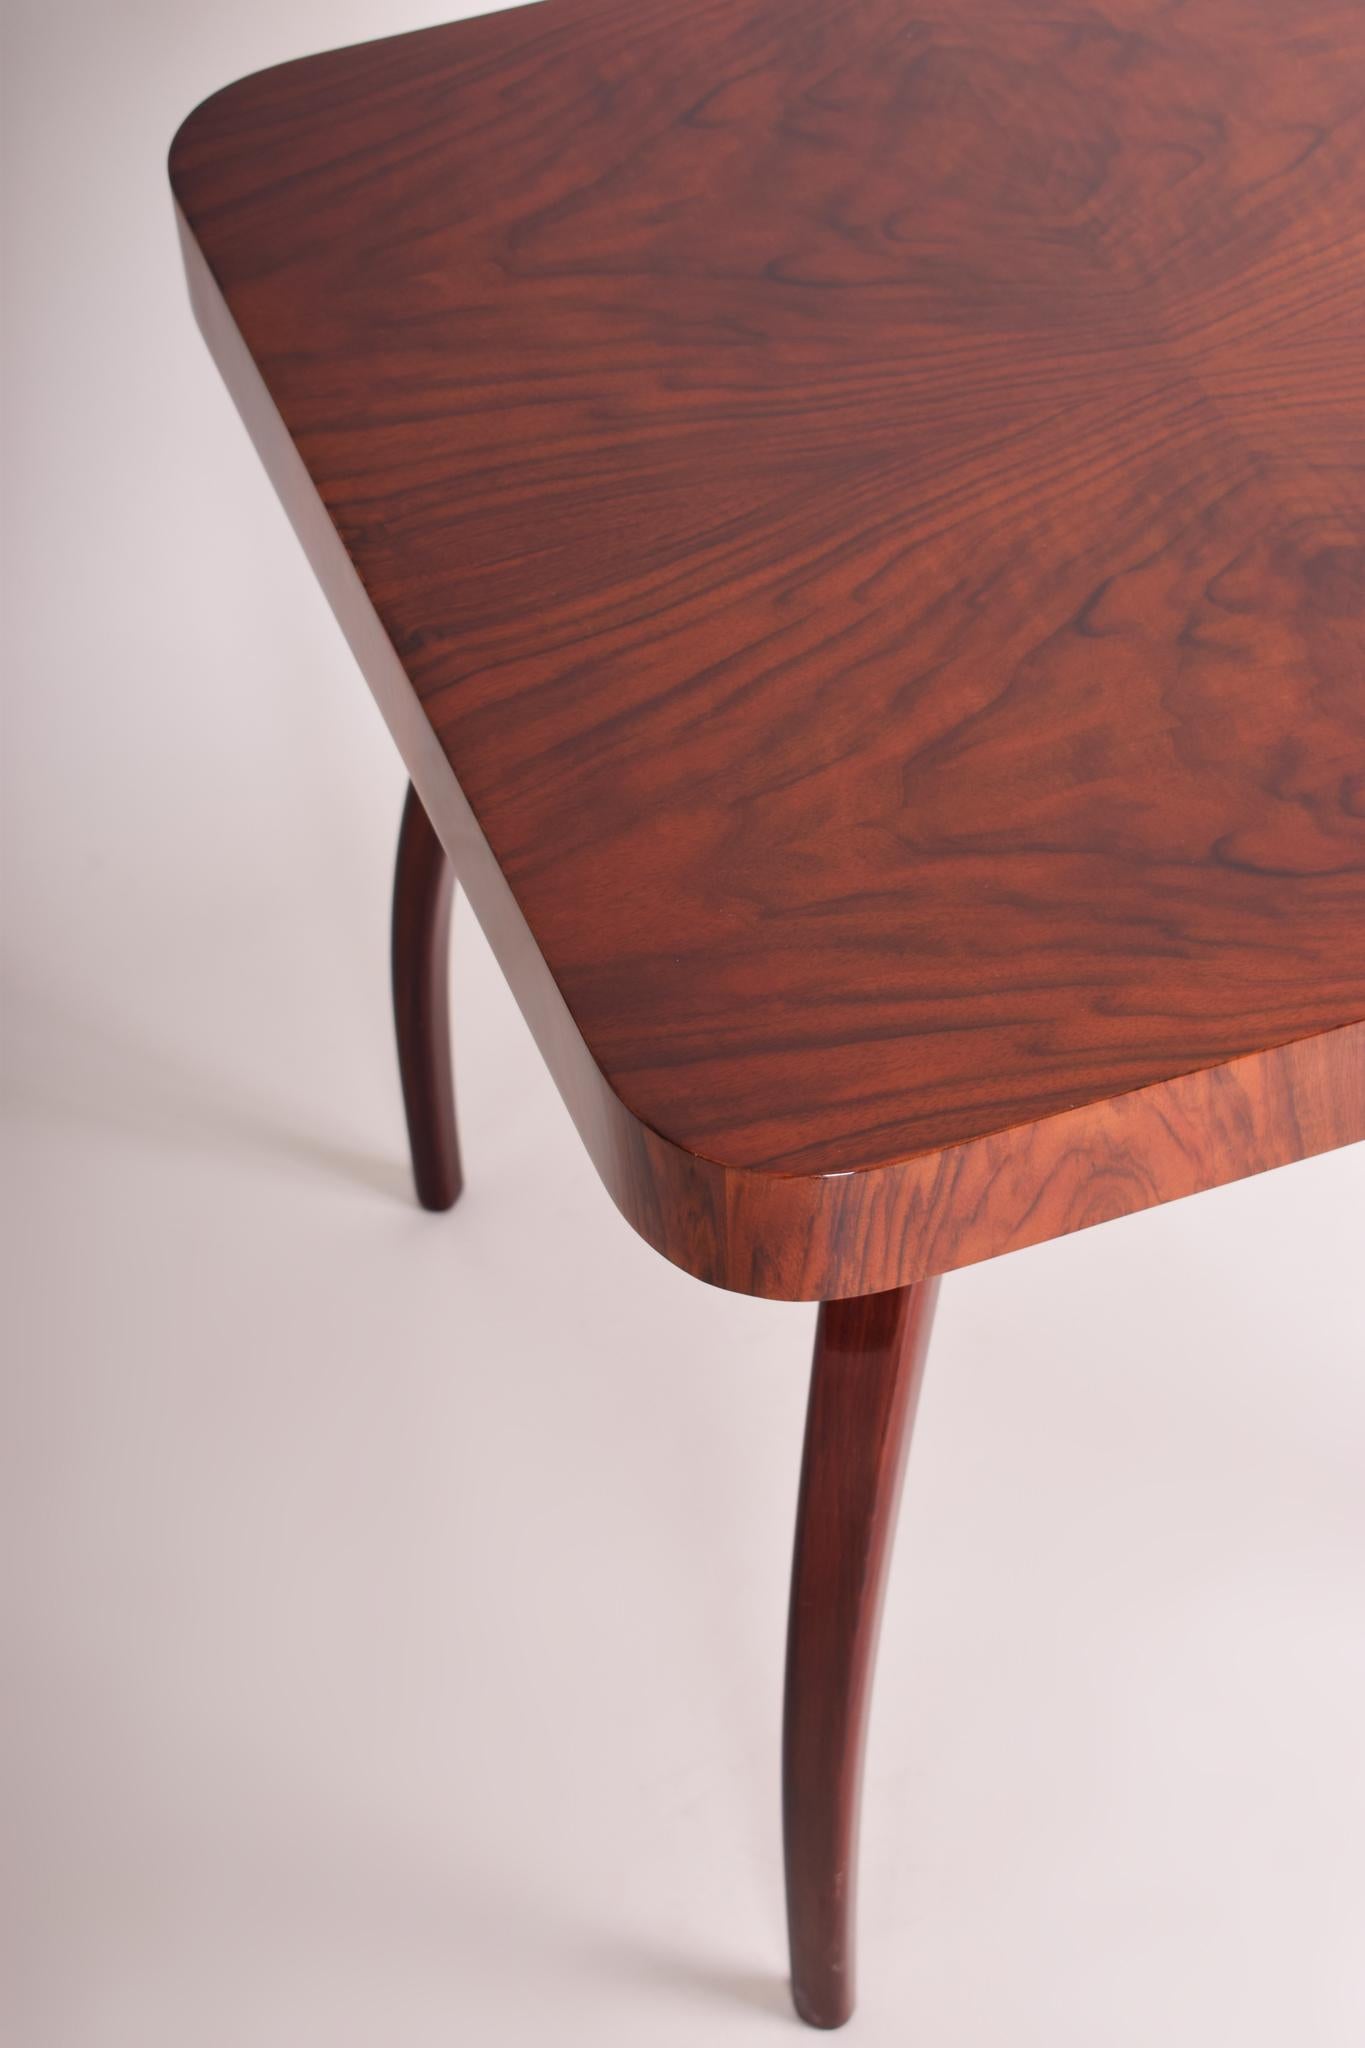 Mid-20th Century Small Brown Pavóuk Table, Designed by Halabala, 1940s, Made in Czechia For Sale